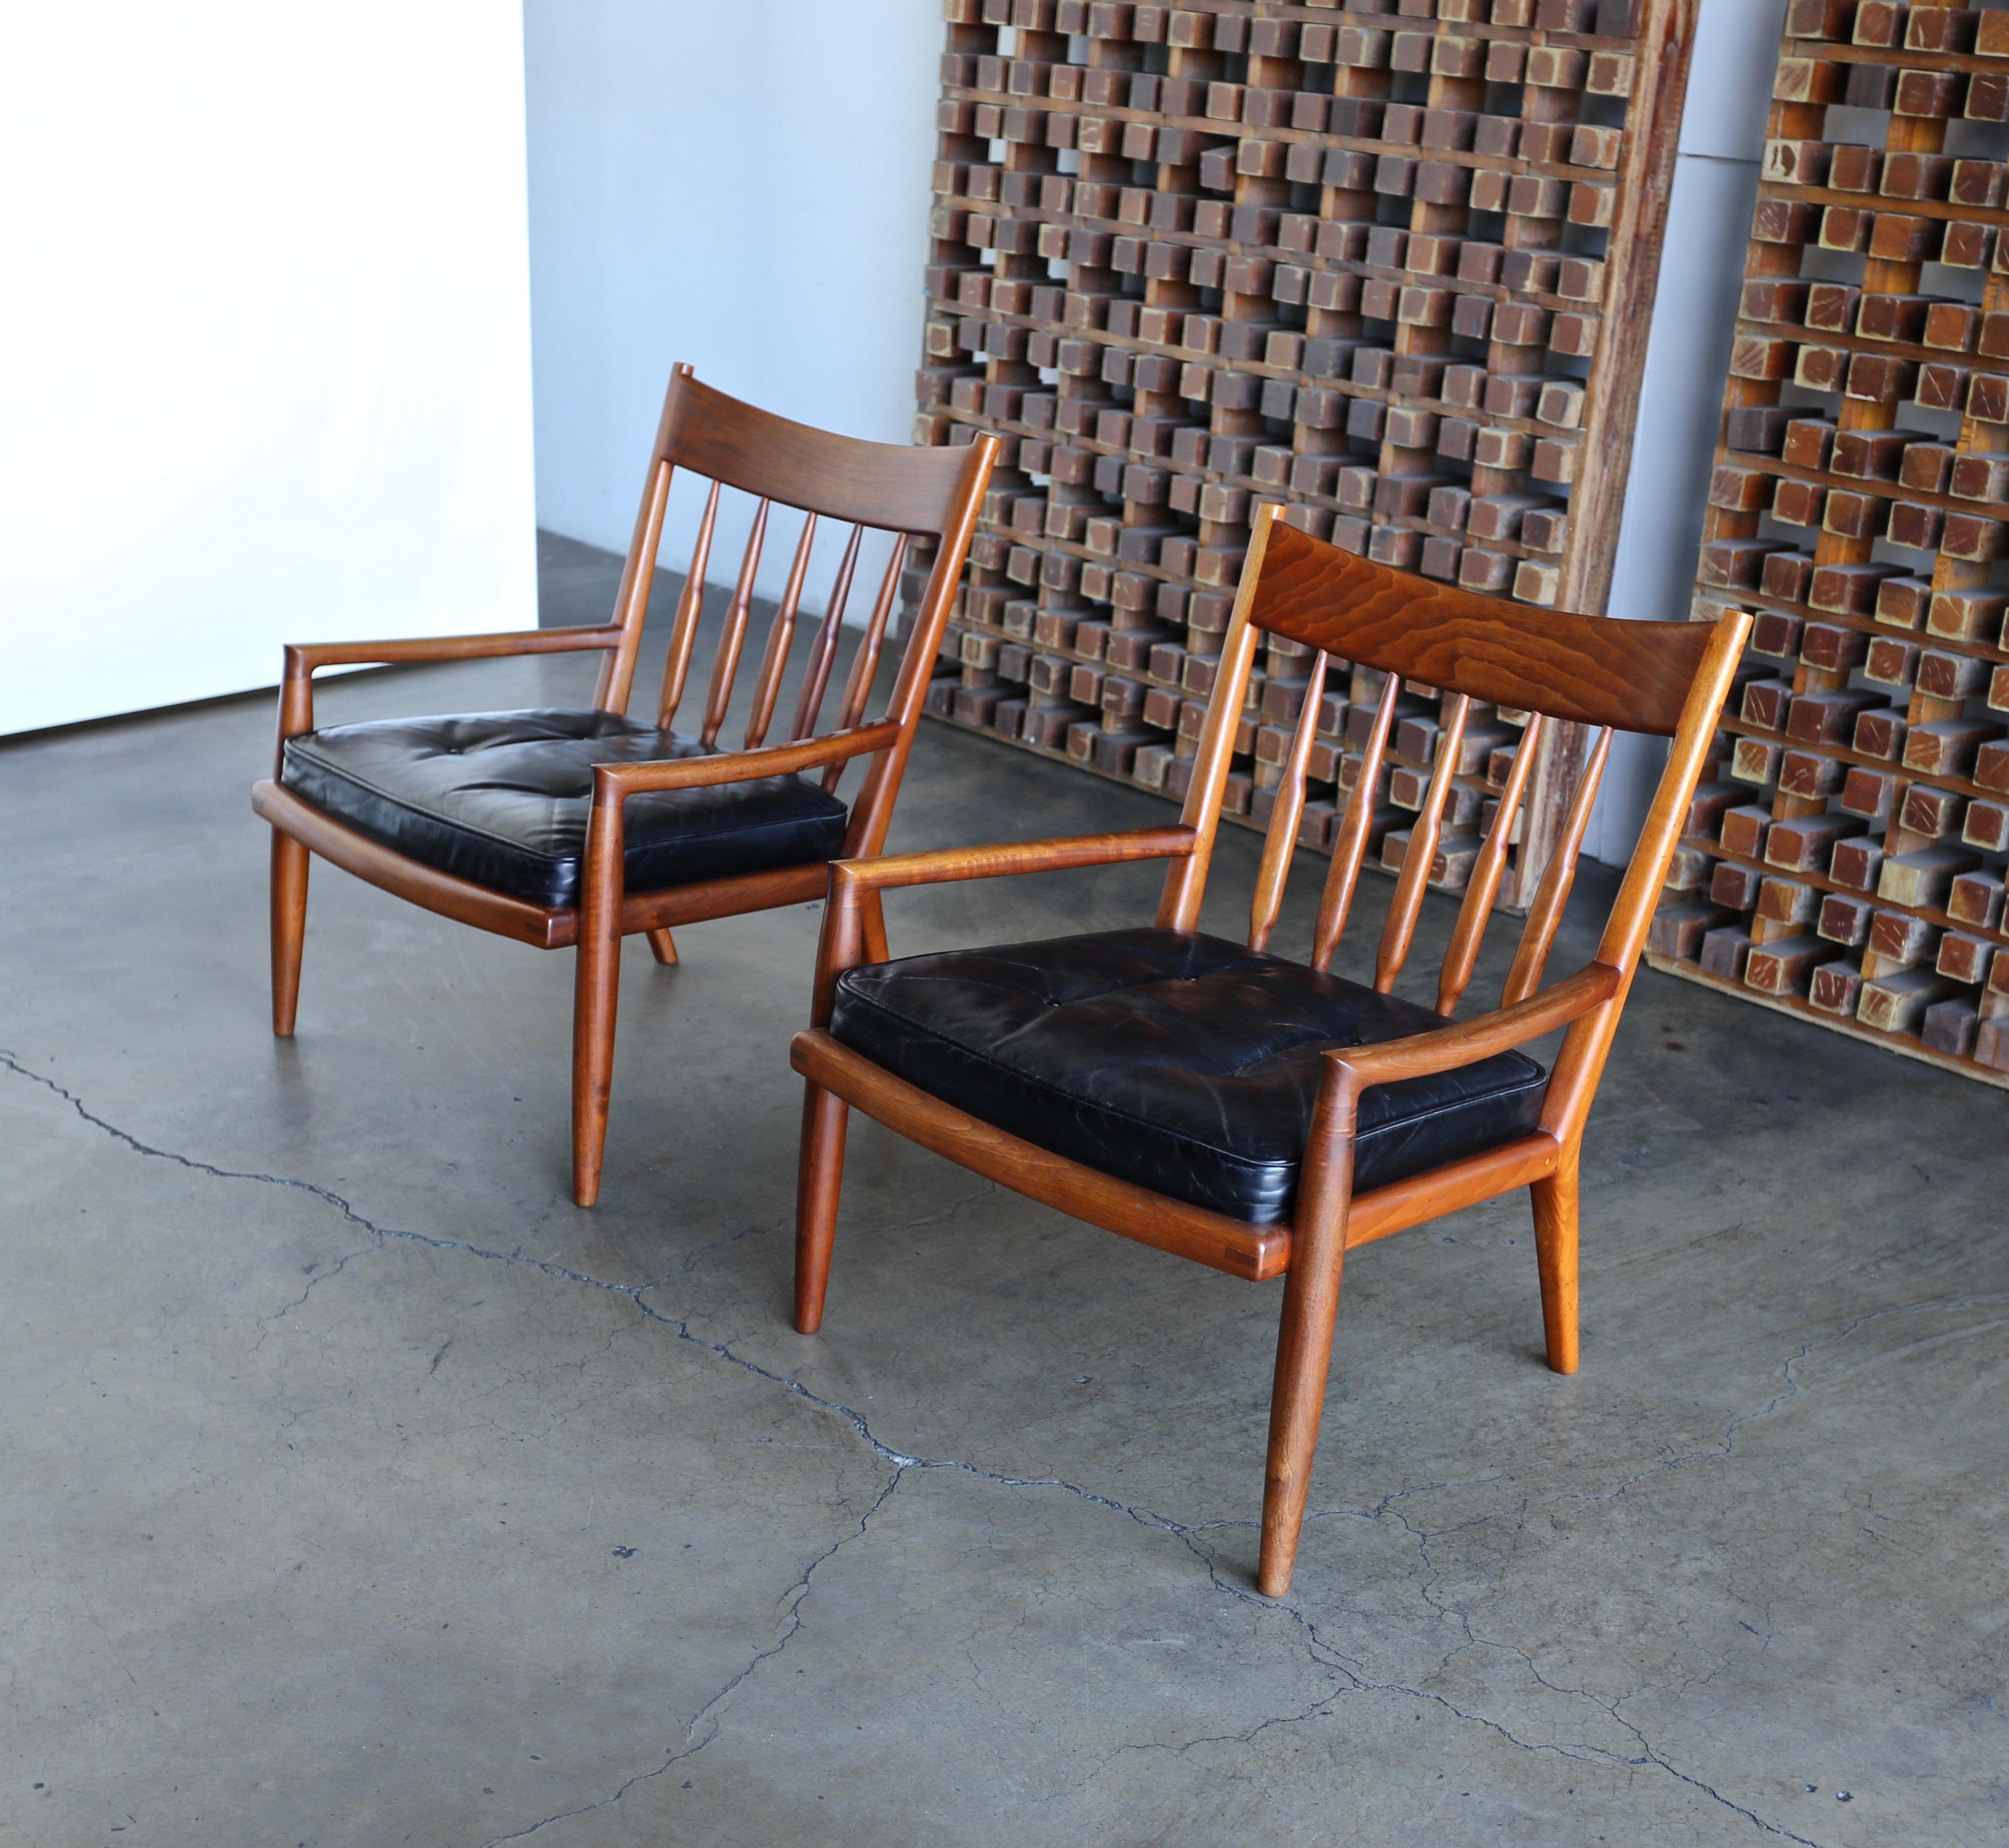 Handcrafted walnut lounge chairs by California Craftsman John Nyquist woodworker, circa 1970.